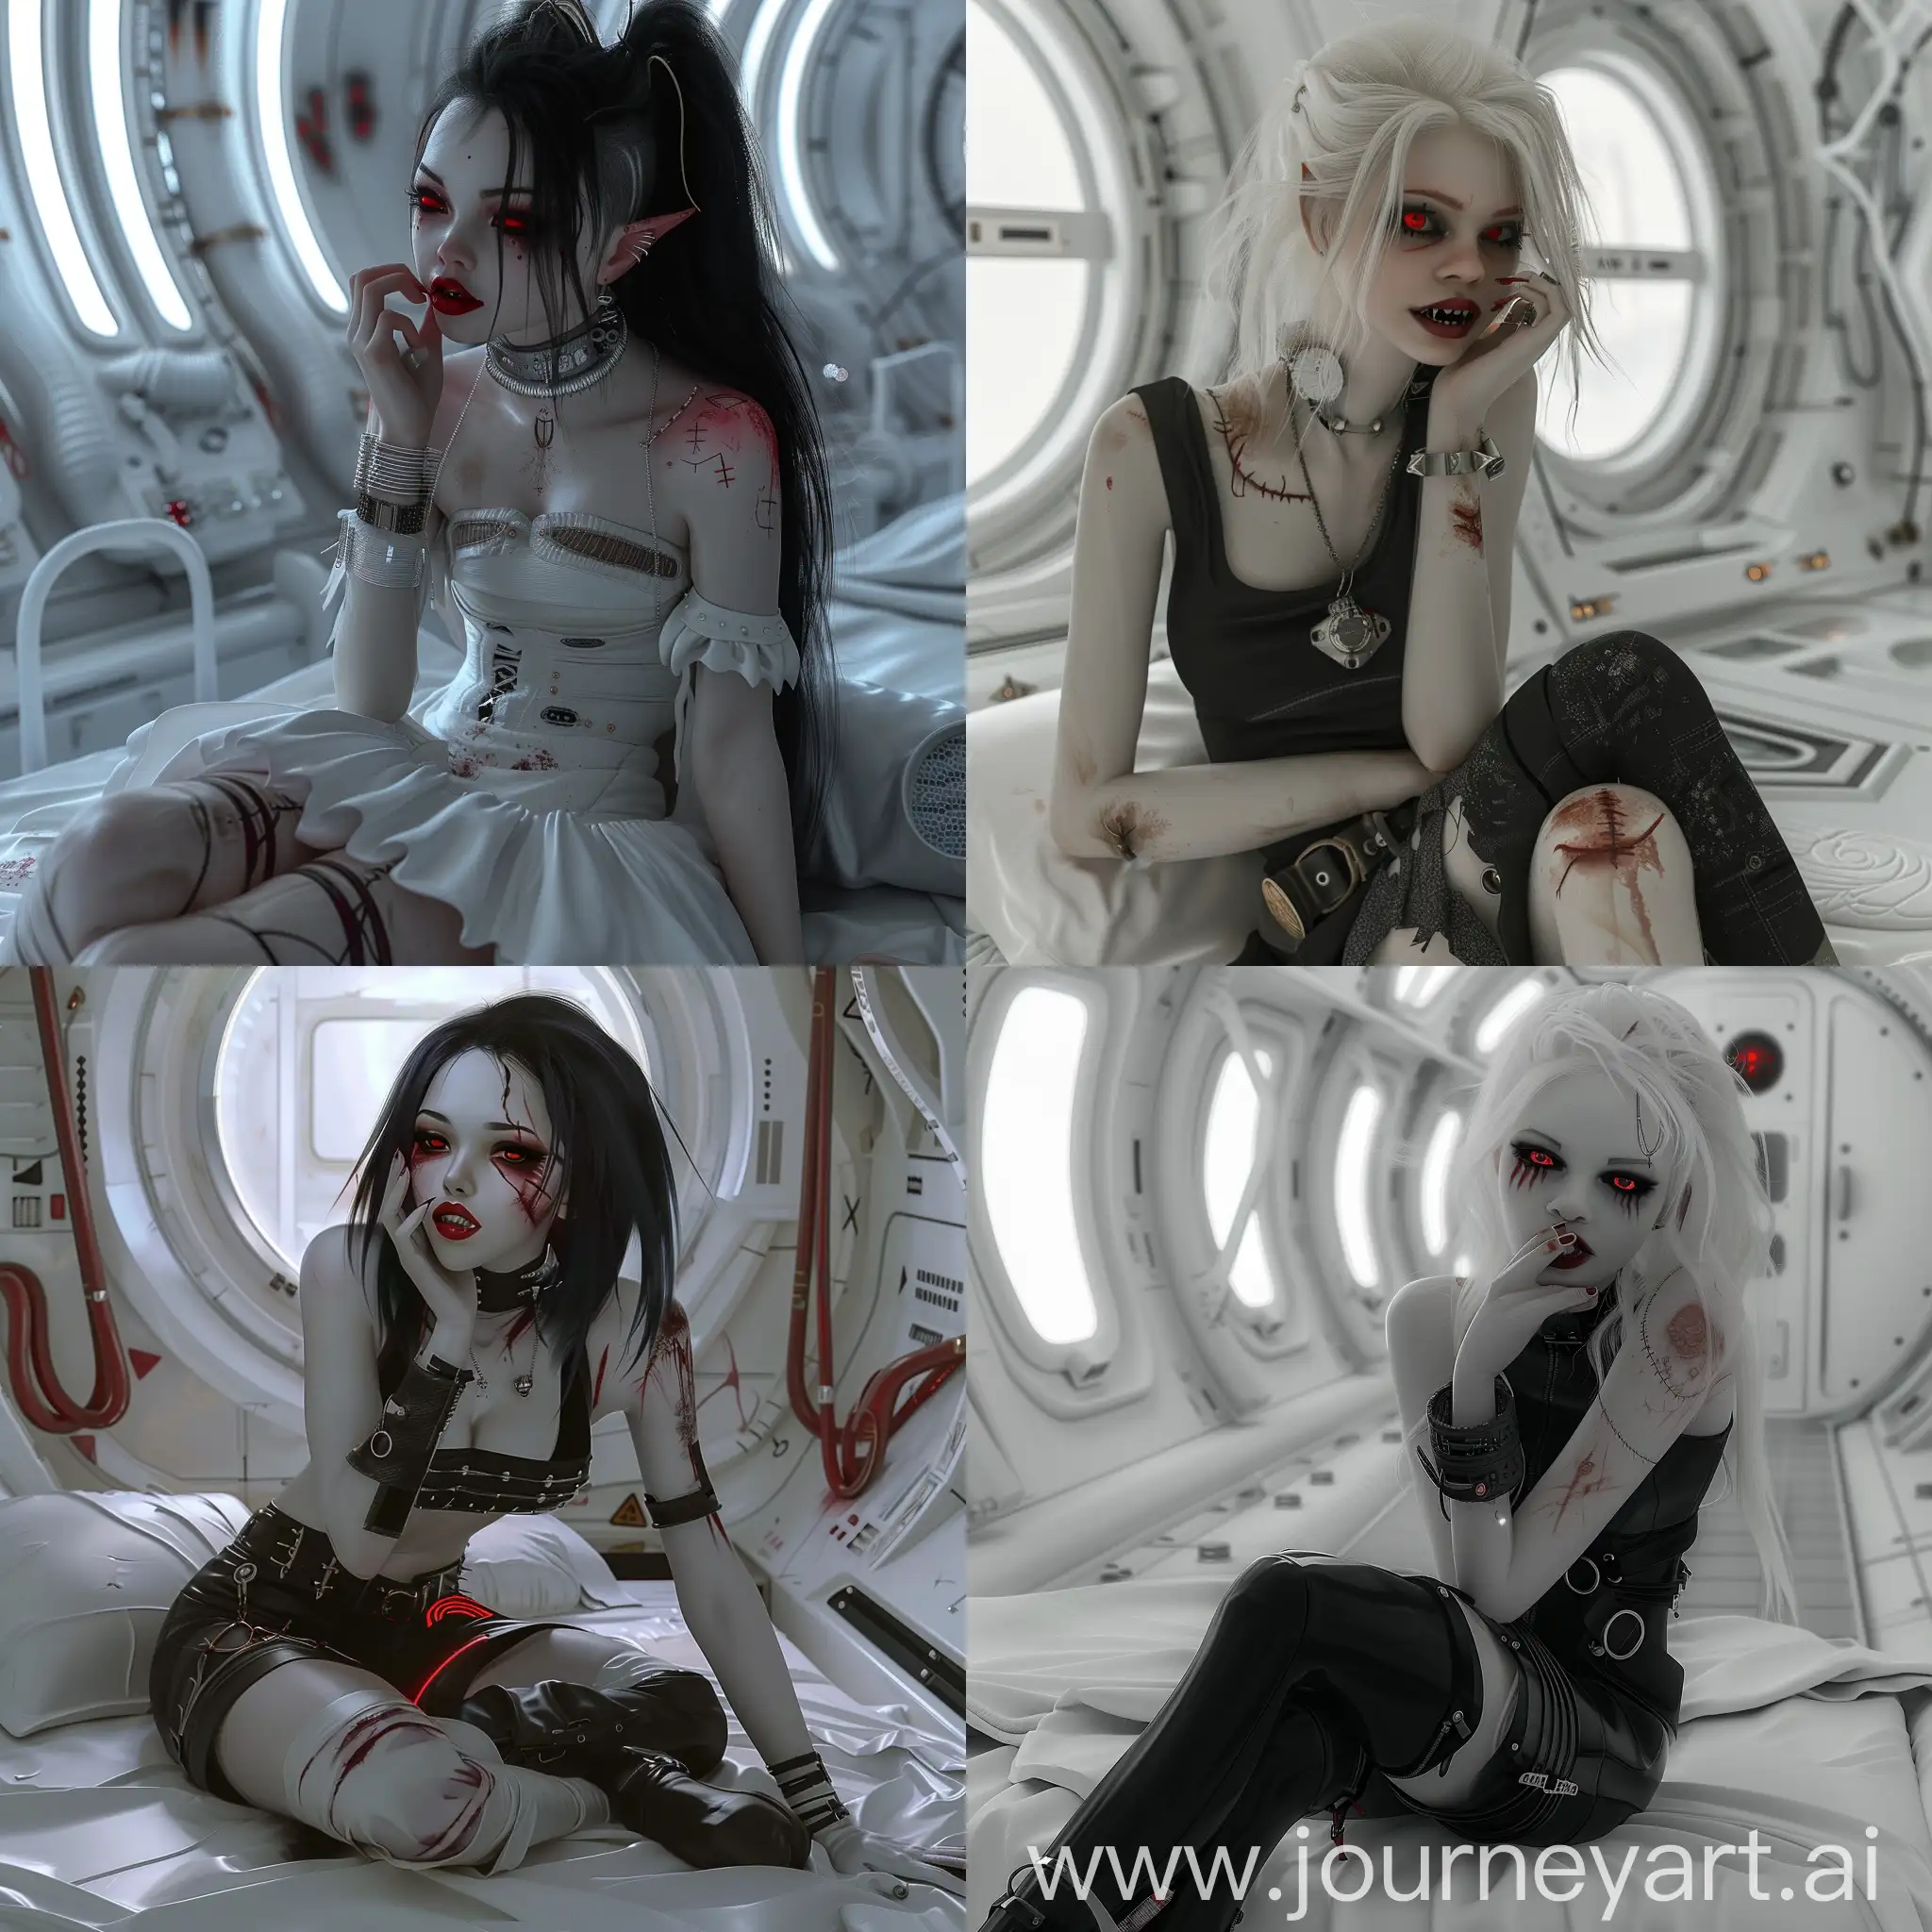 A loyal pale vampire with dark red eyes and great figure, punk style, Detailed, 3D, White Space Station Background, Sci-Fi, Beautiful Vampire, Scars, posing, on bed, smirking and licking her own lips.